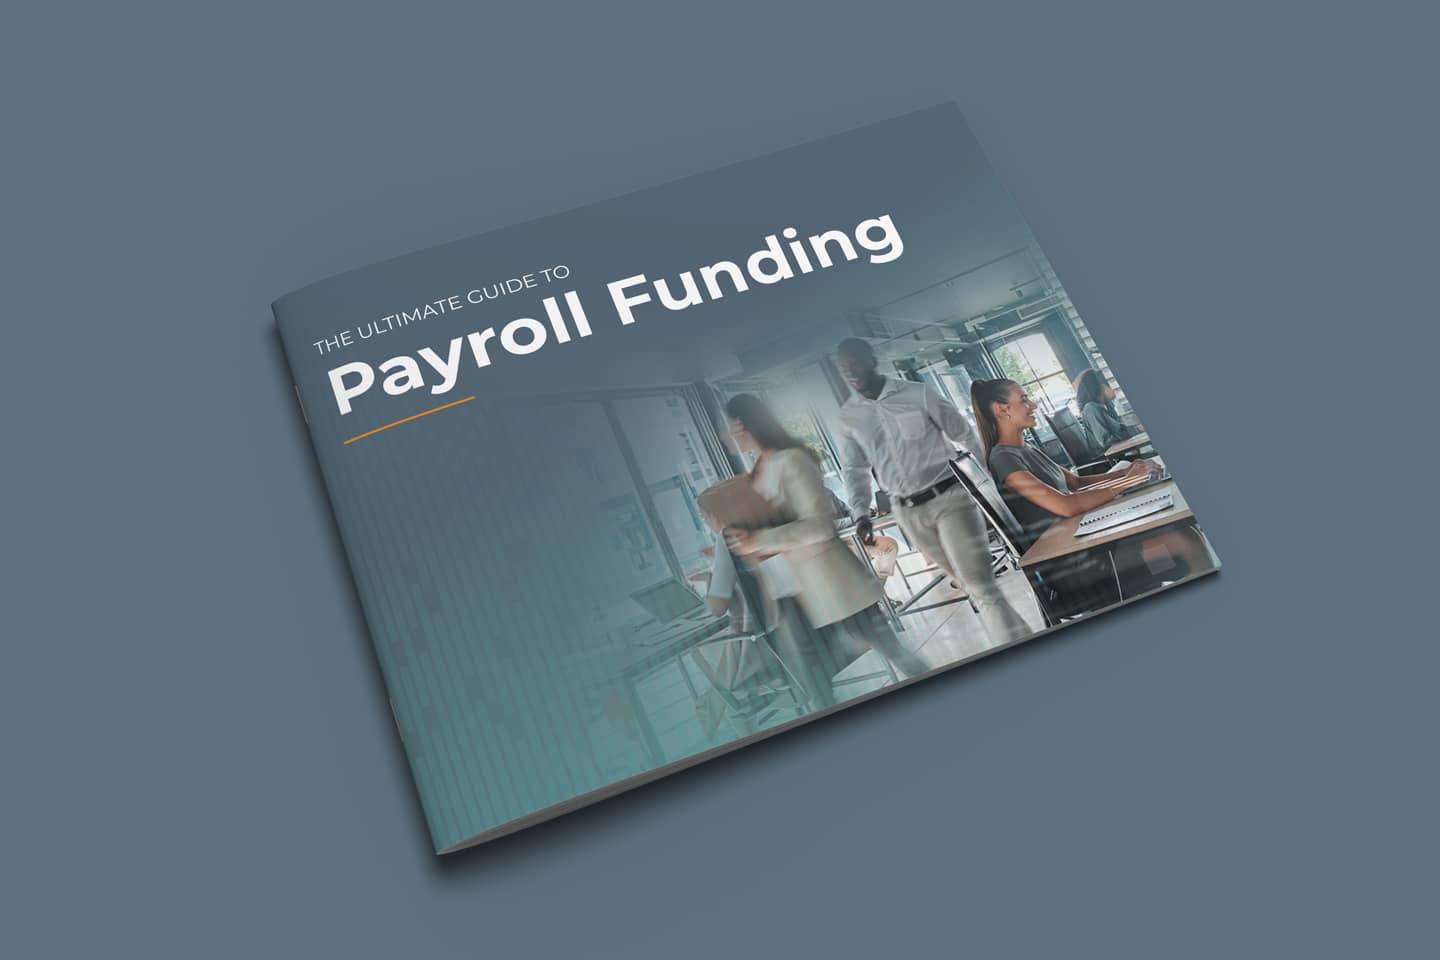 The ultimate guide to Payroll Funding magazine